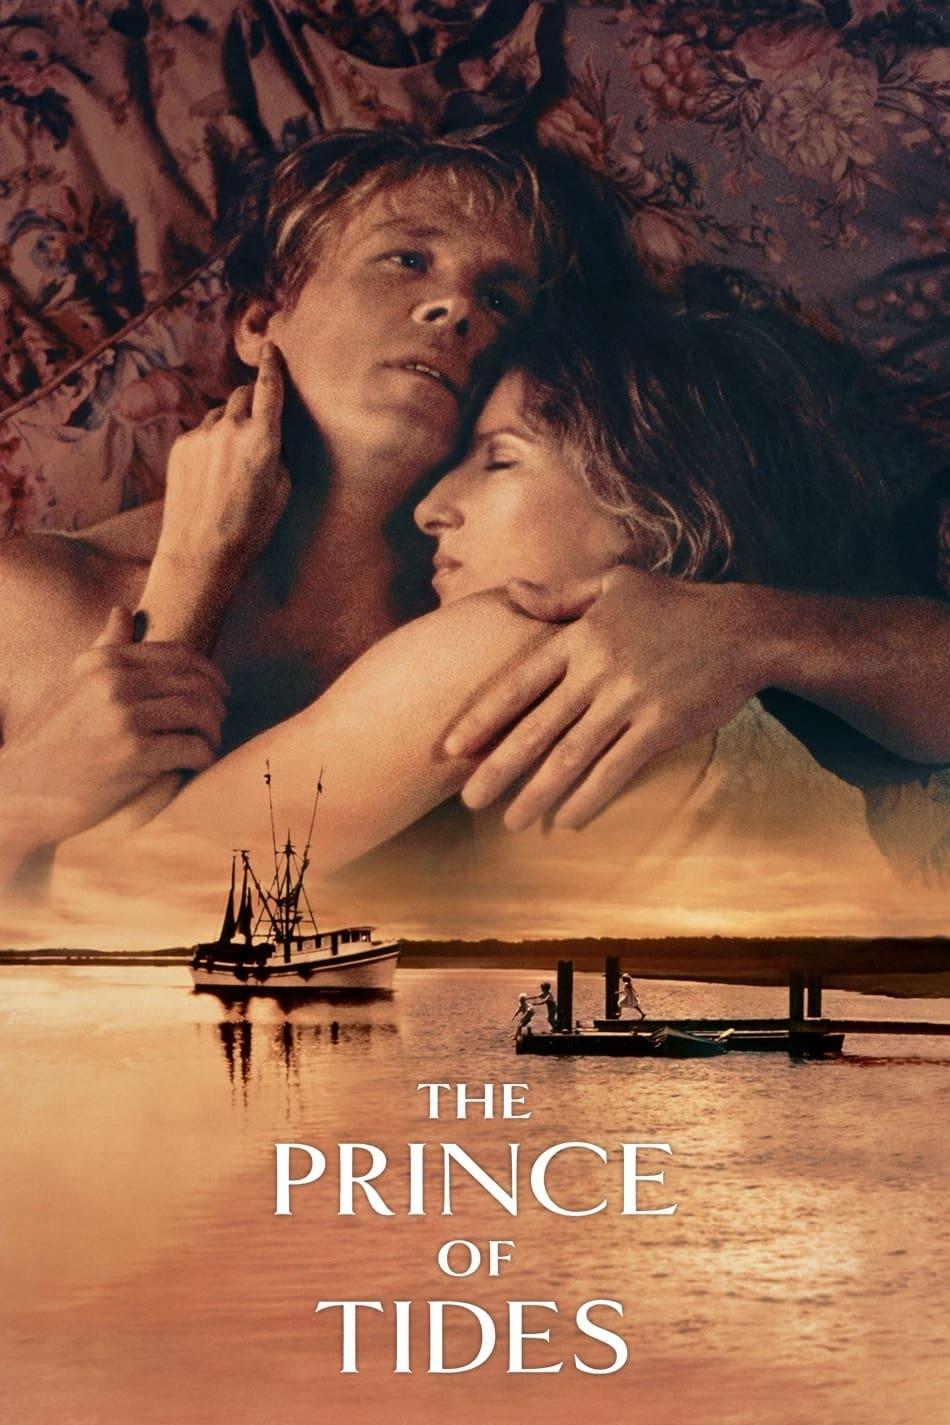 The Prince of Tides poster